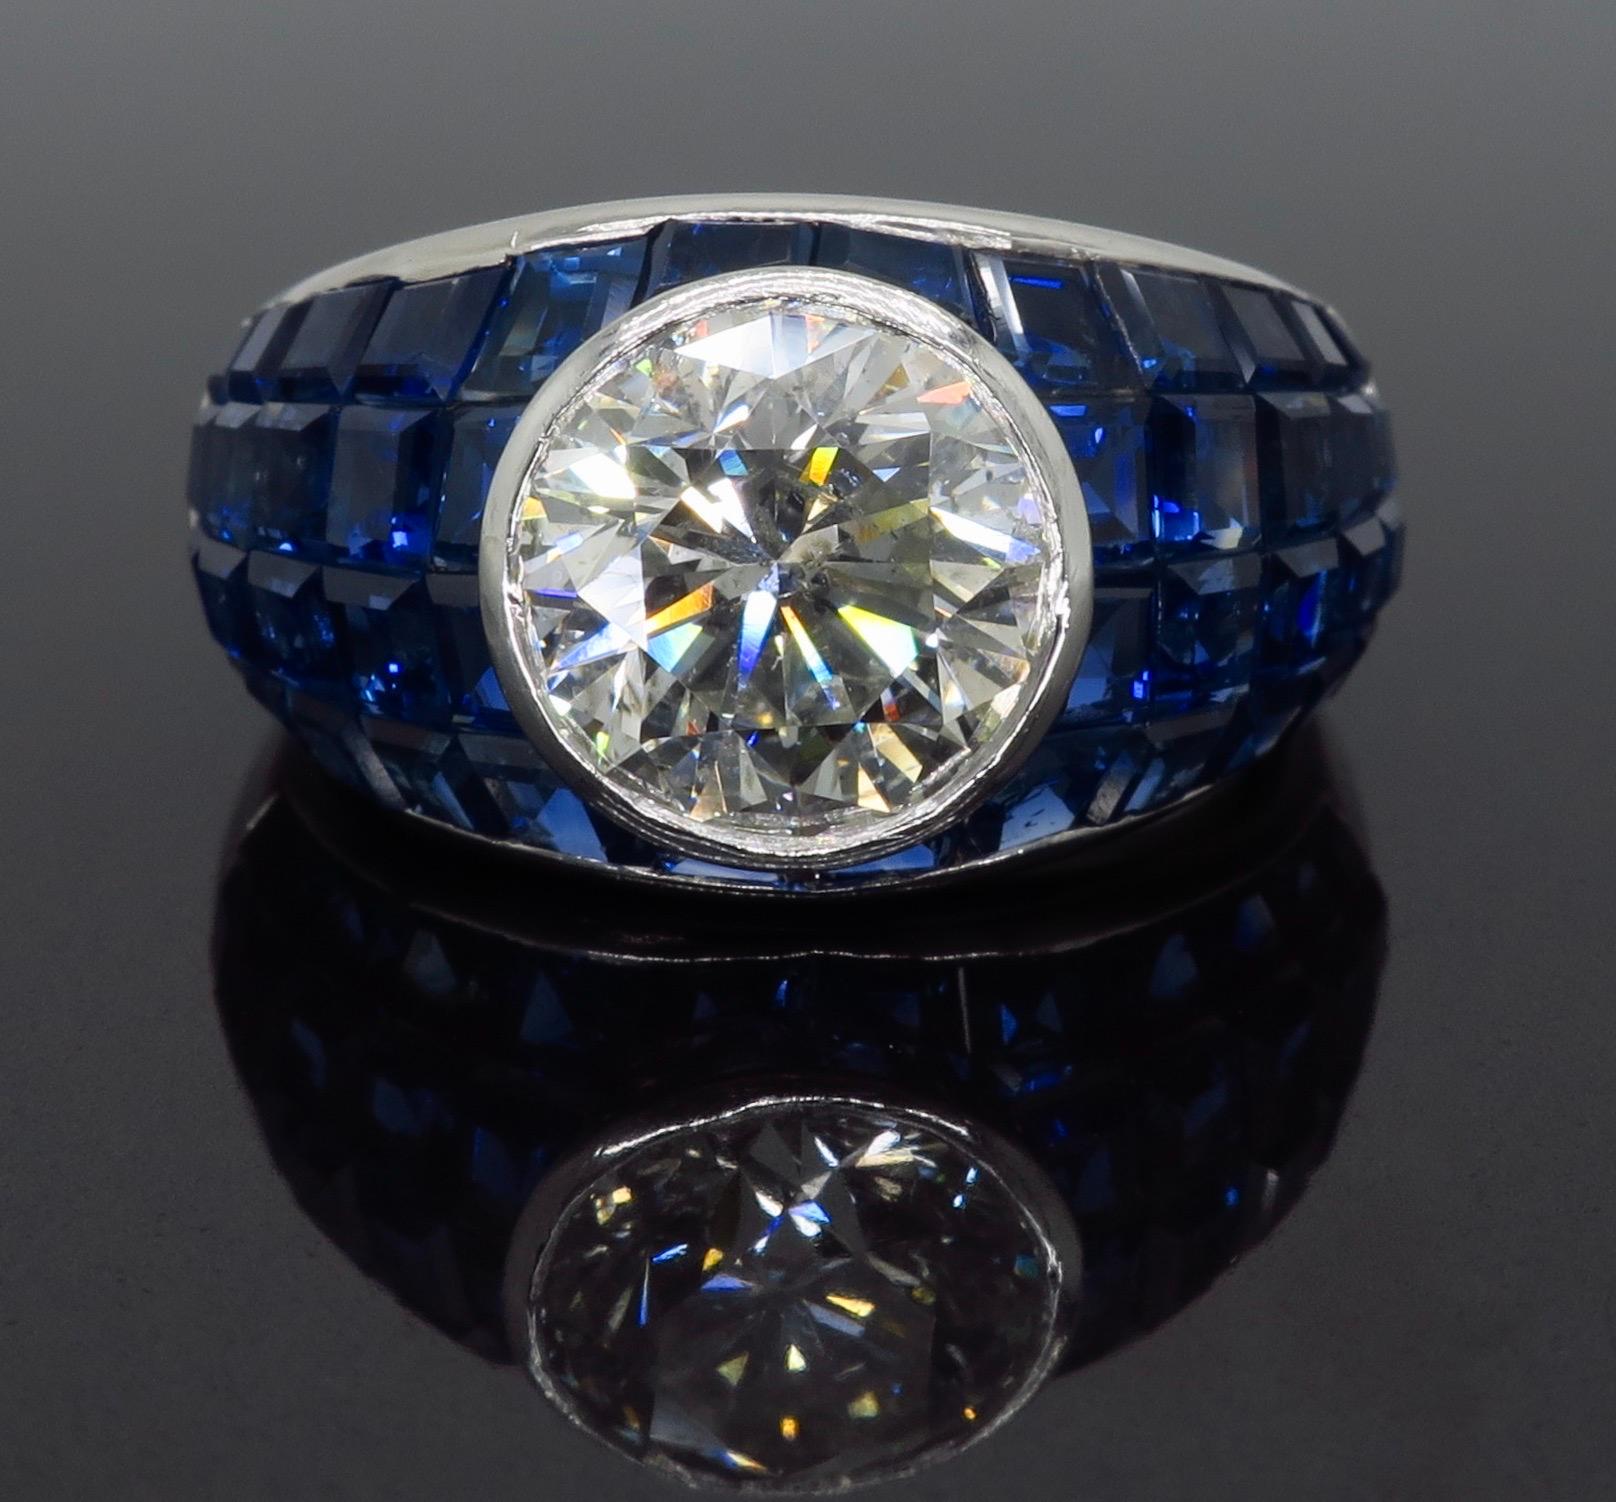 Vintage approximately 2.62CT Round Brilliant Cut diamond ring with blue sapphires set in a mosaic design crafted in platinum

Gemstone: Diamond and Sapphire
Gemstone Size: Irregular Cut Blue Sapphires ranging from approximately 2.00-2.4mm in